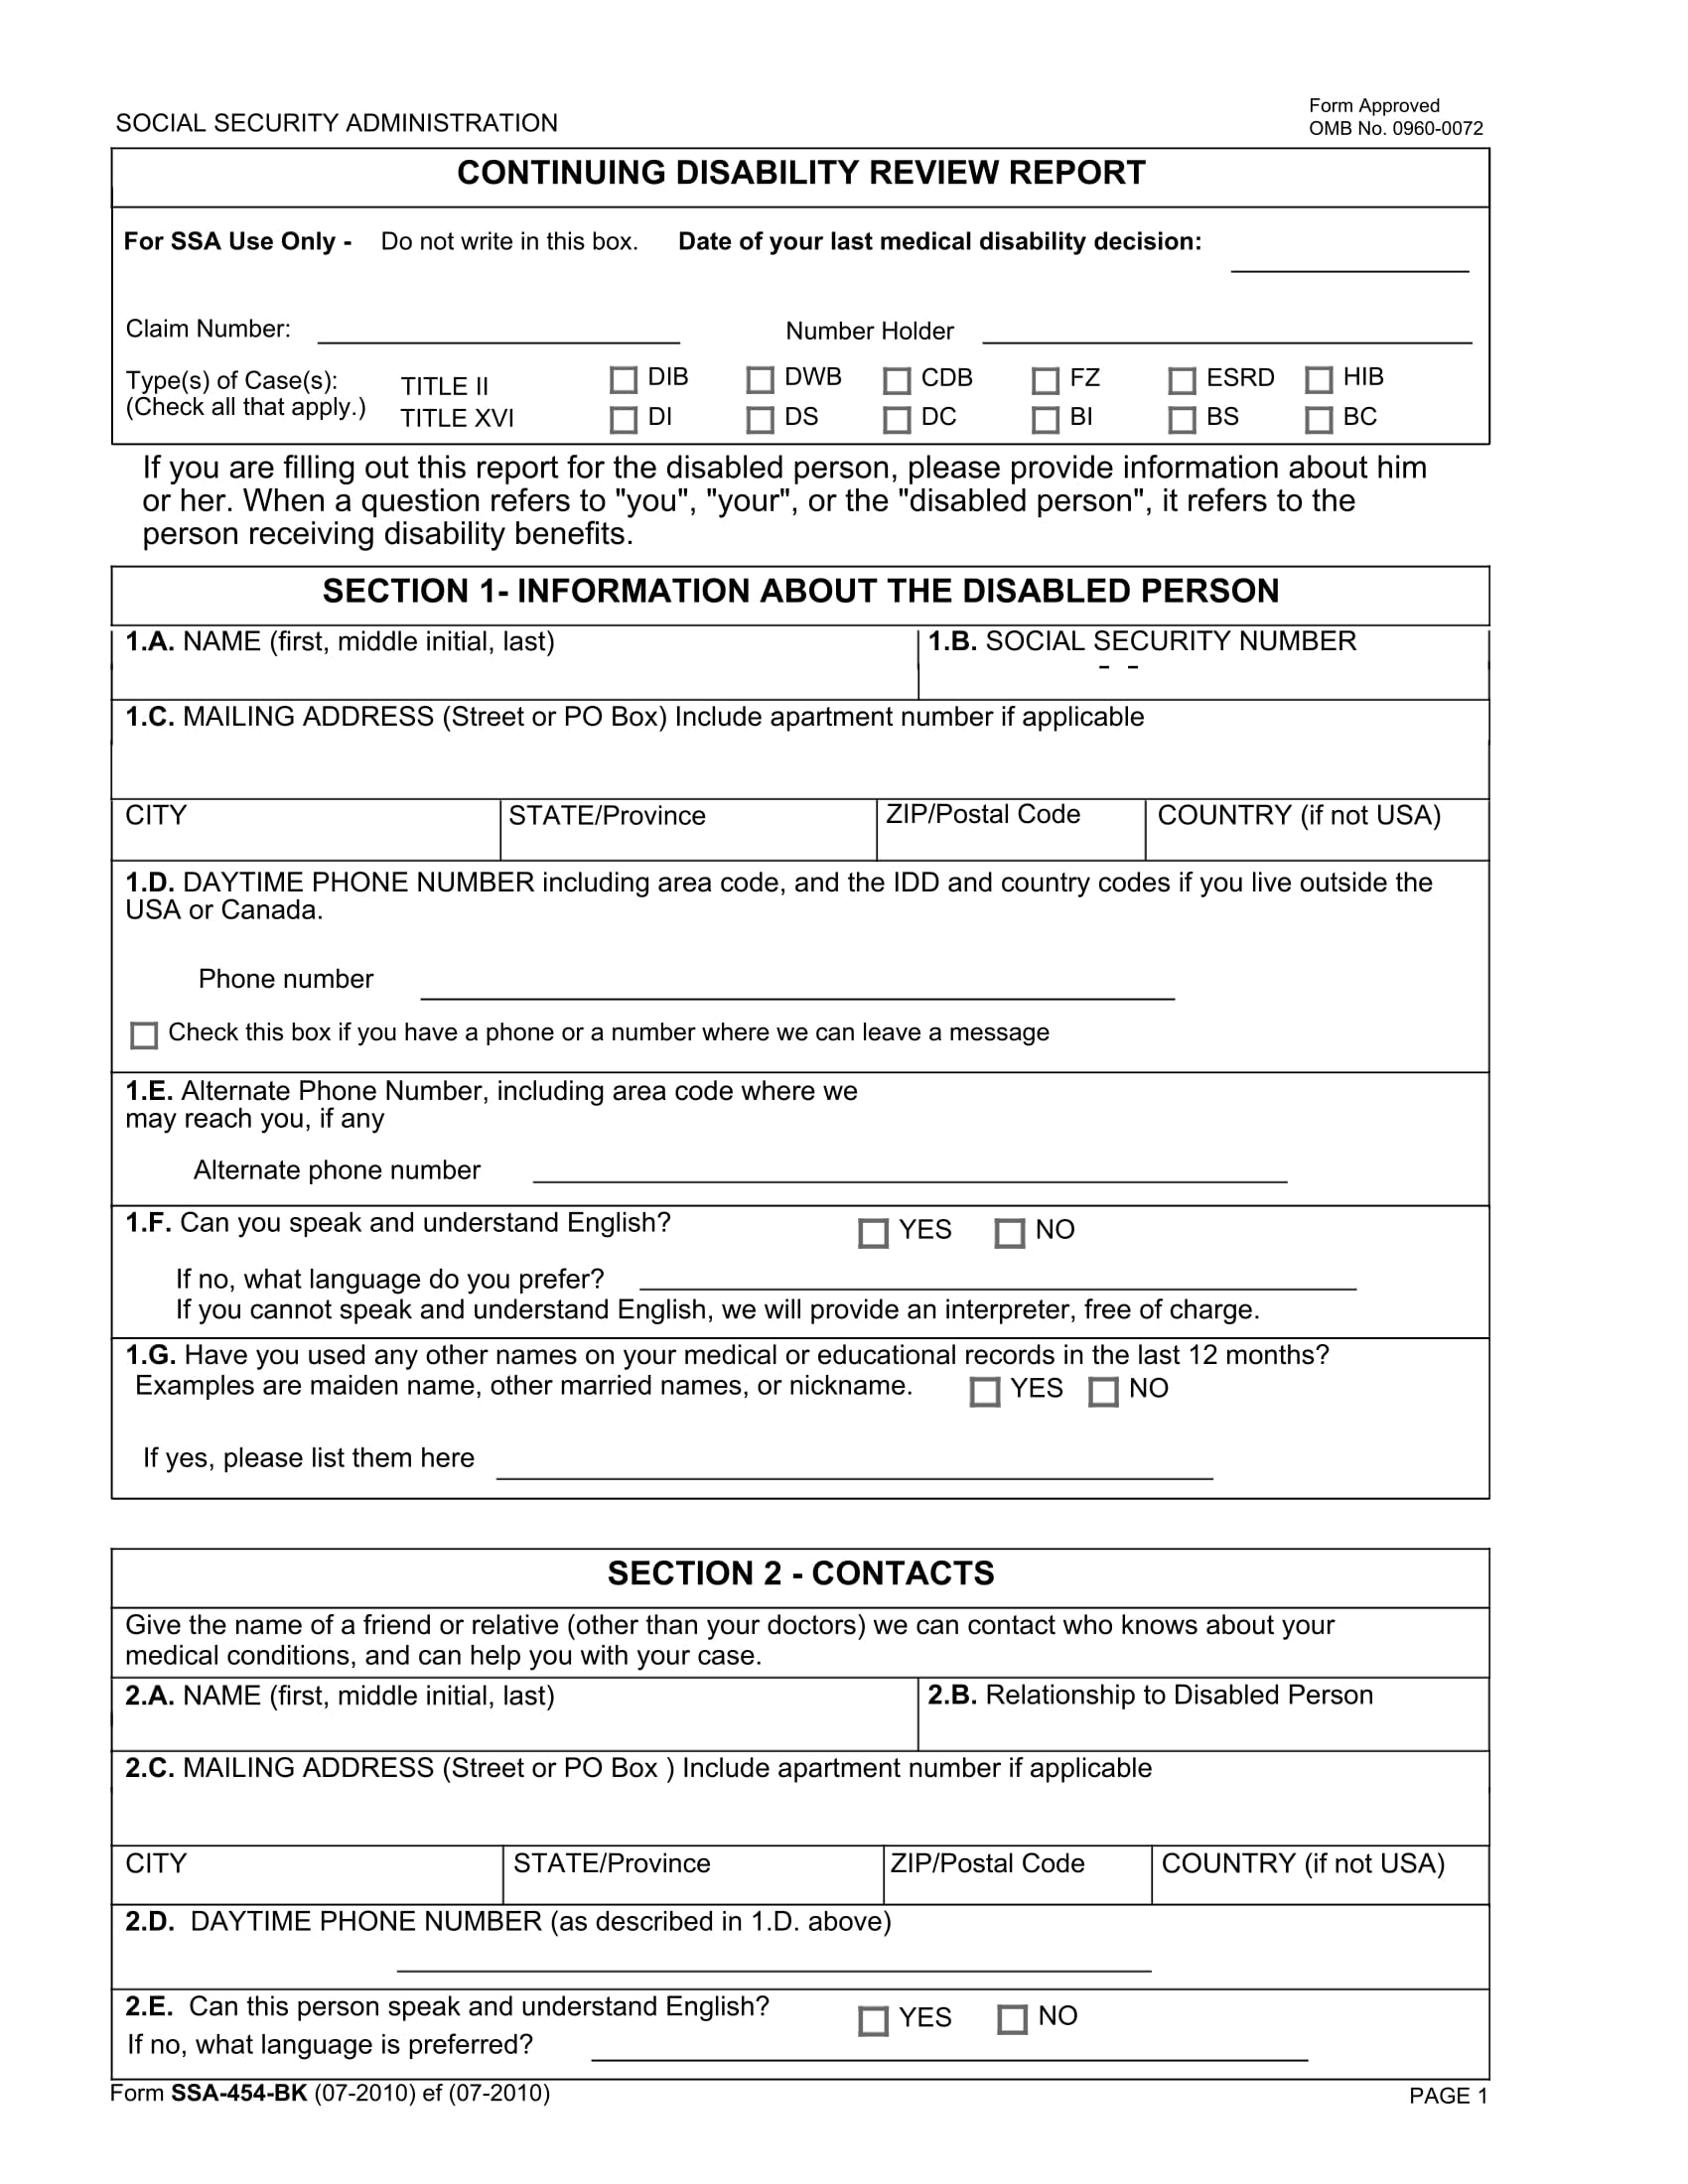 continuing disability review report form 03